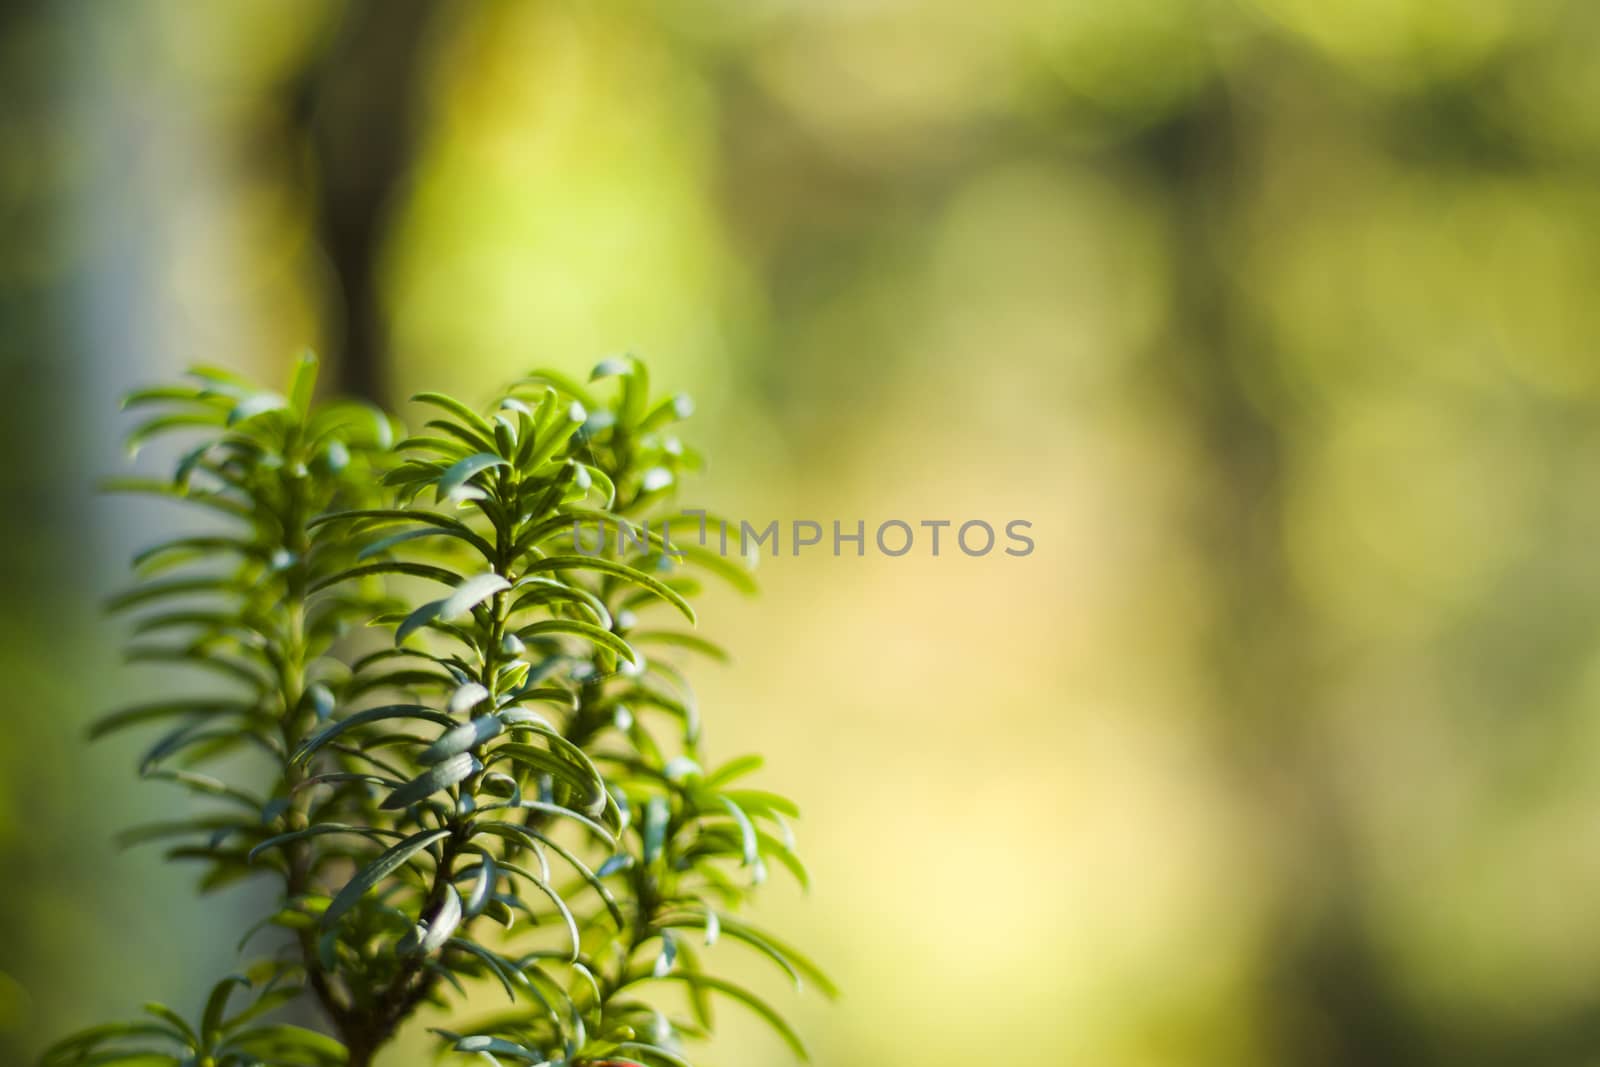 Yaw tree leaves close-up and macro, sunlight and green color background, Tacus Cuspidata